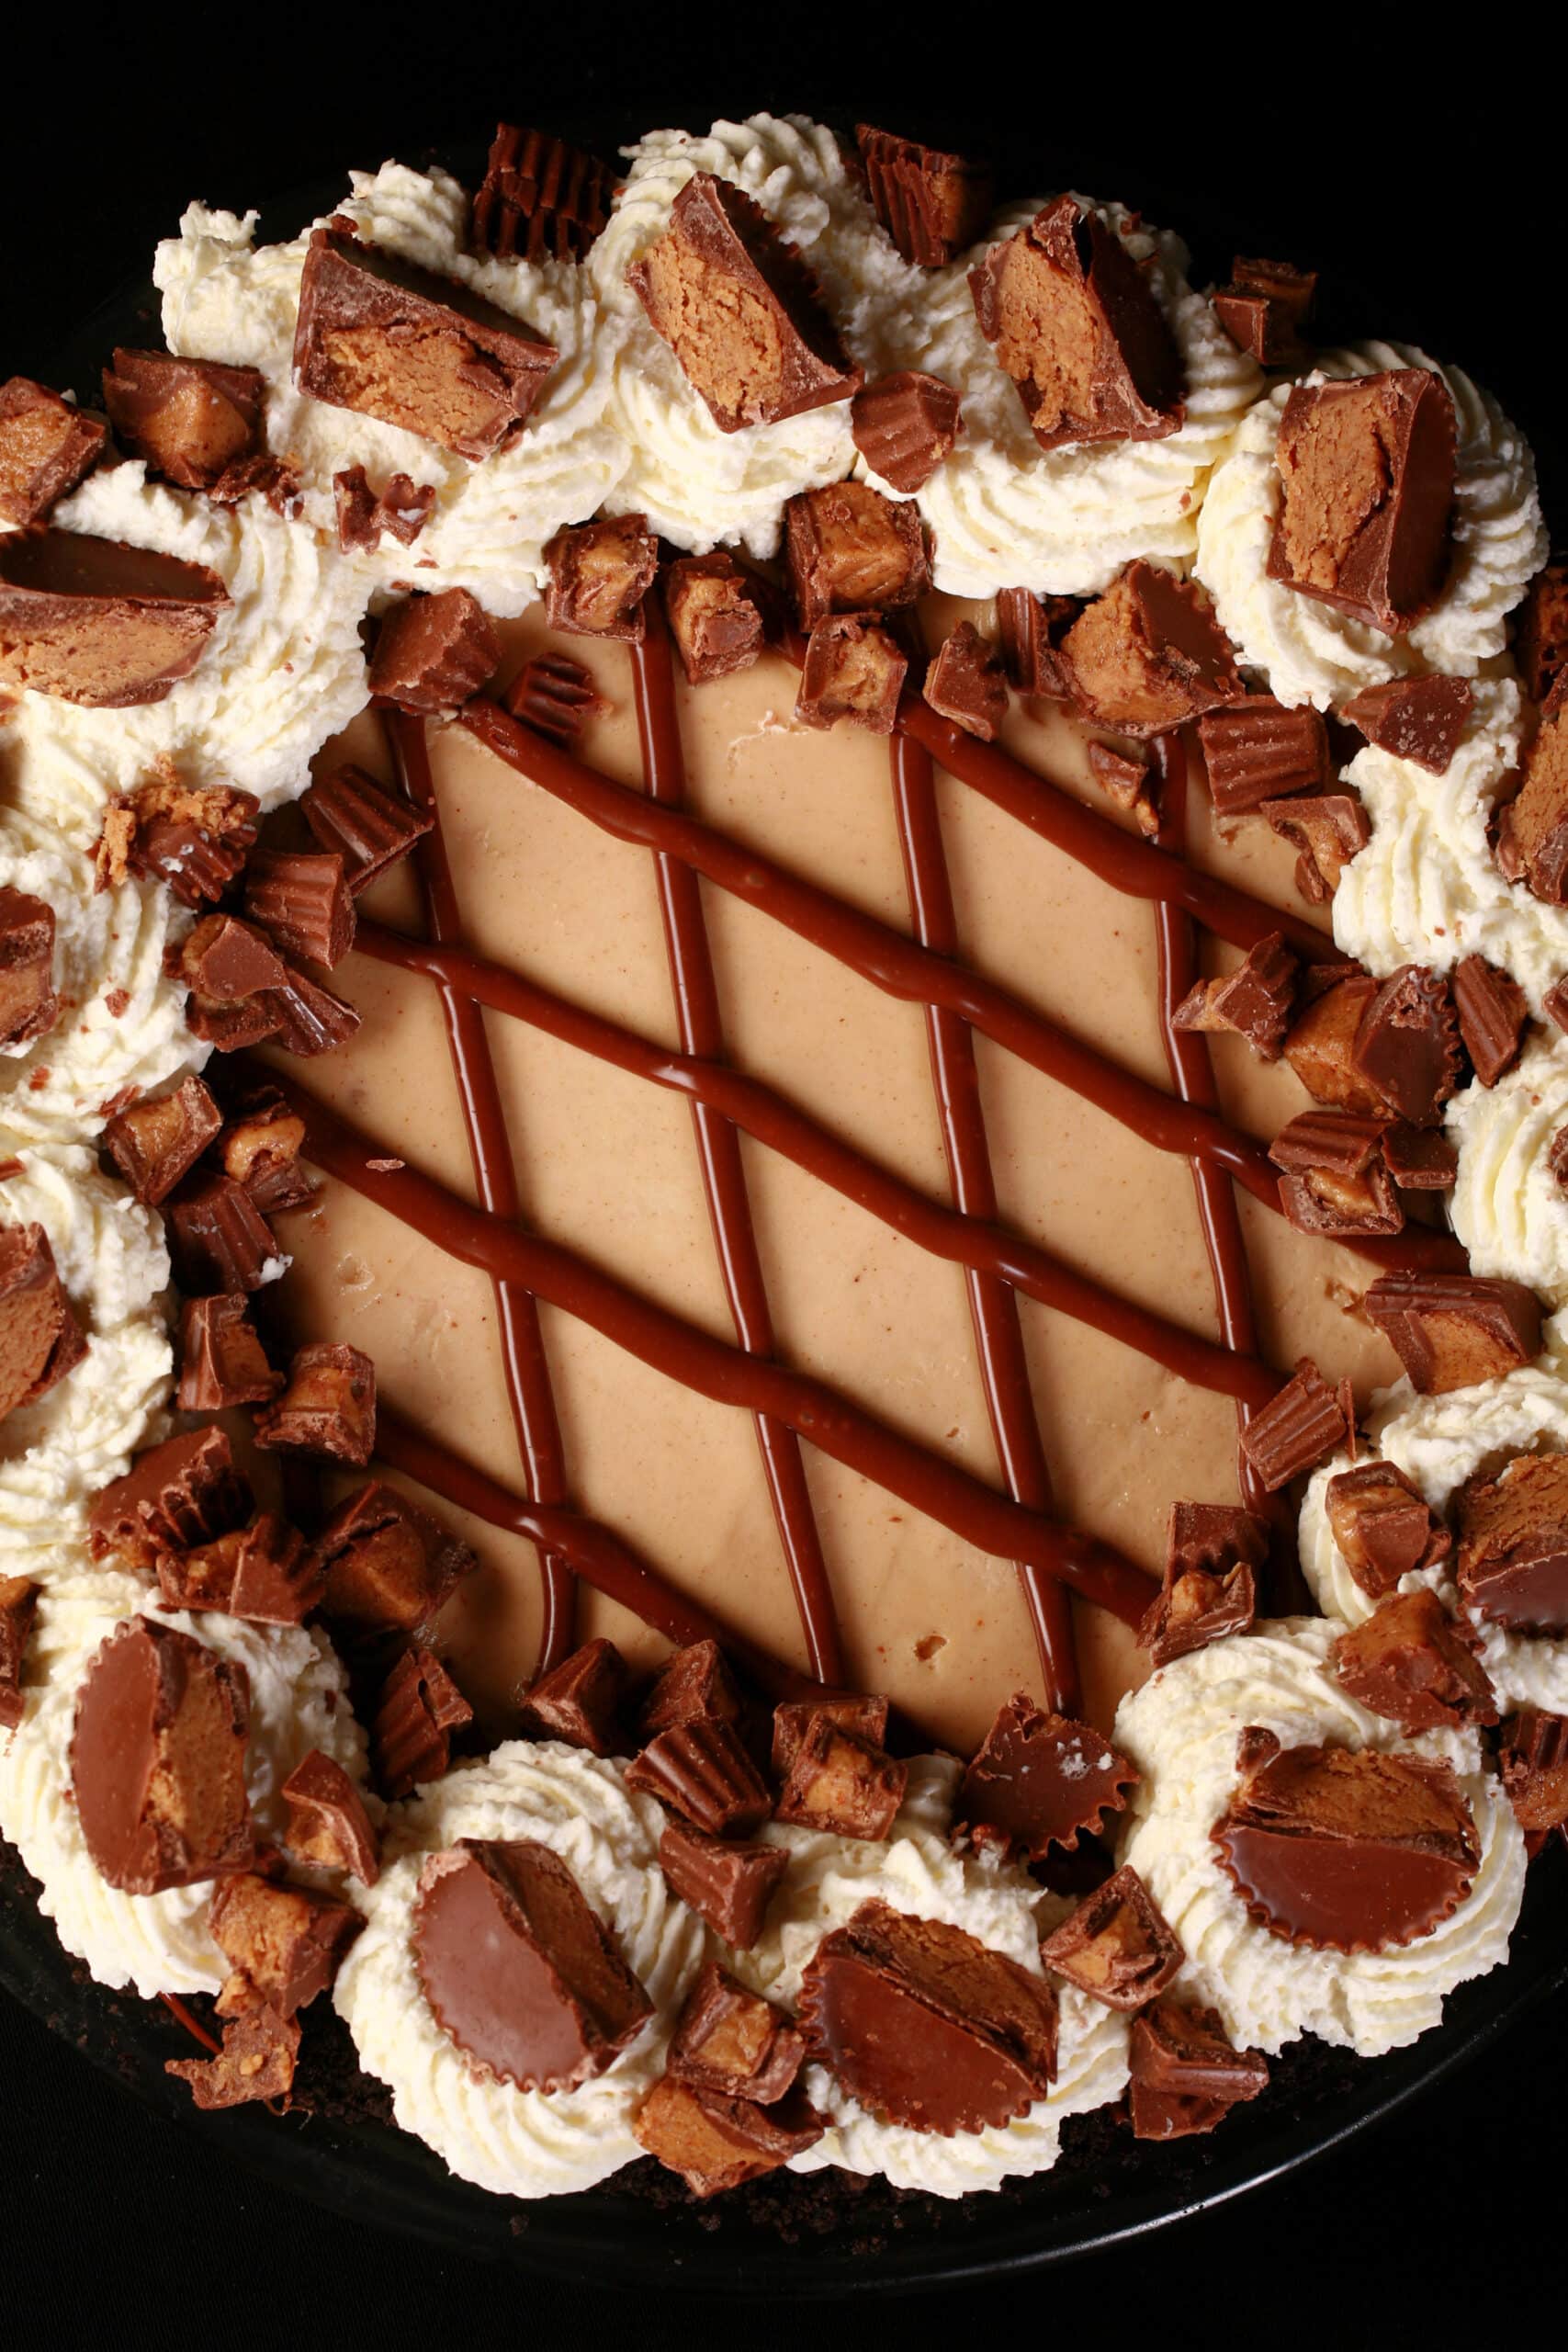 A whole Reese’s Pie, topped with chopped up mini peanut butter cups.